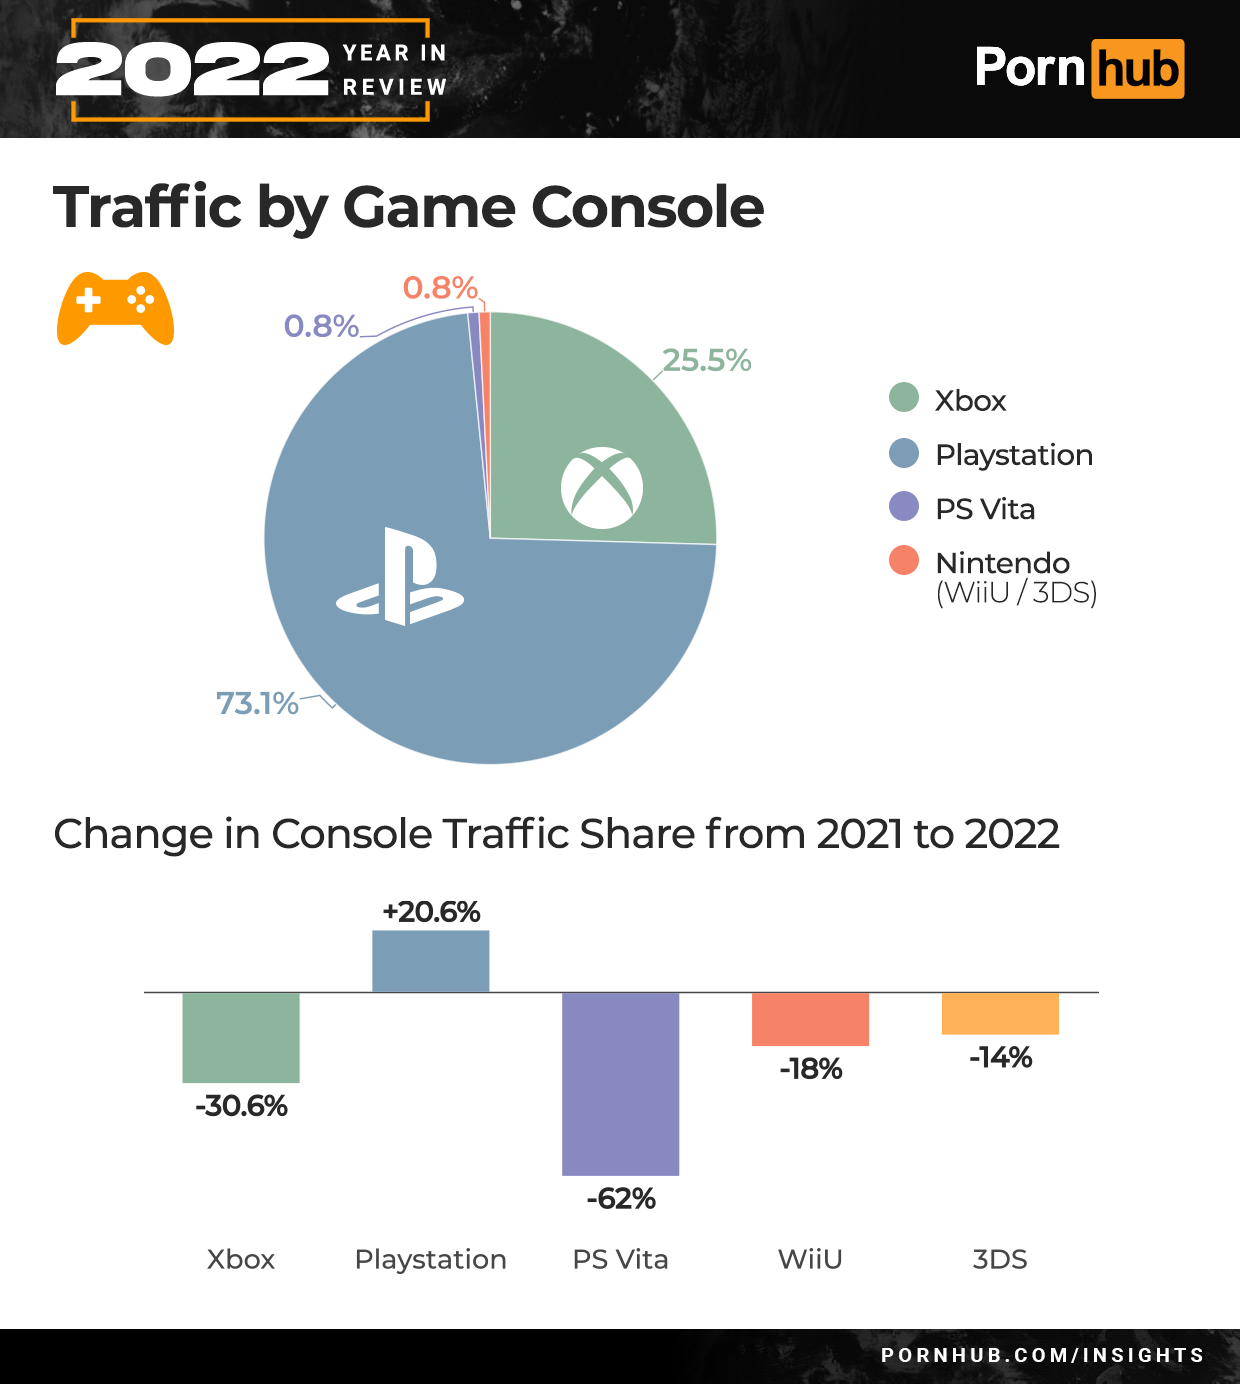 pornhub year in review 2022 - most searched video game on pronhub 2021 - 2022 Traffic by Game Console 0.8% 73.1% Year In Review 0.8% 30.6% Xbox B 20.6% Playstation 25.5% Change in Console Traffic from 2021 to 2022 62% Ps Vita 18% Porn hub WiiU Xbox Playst